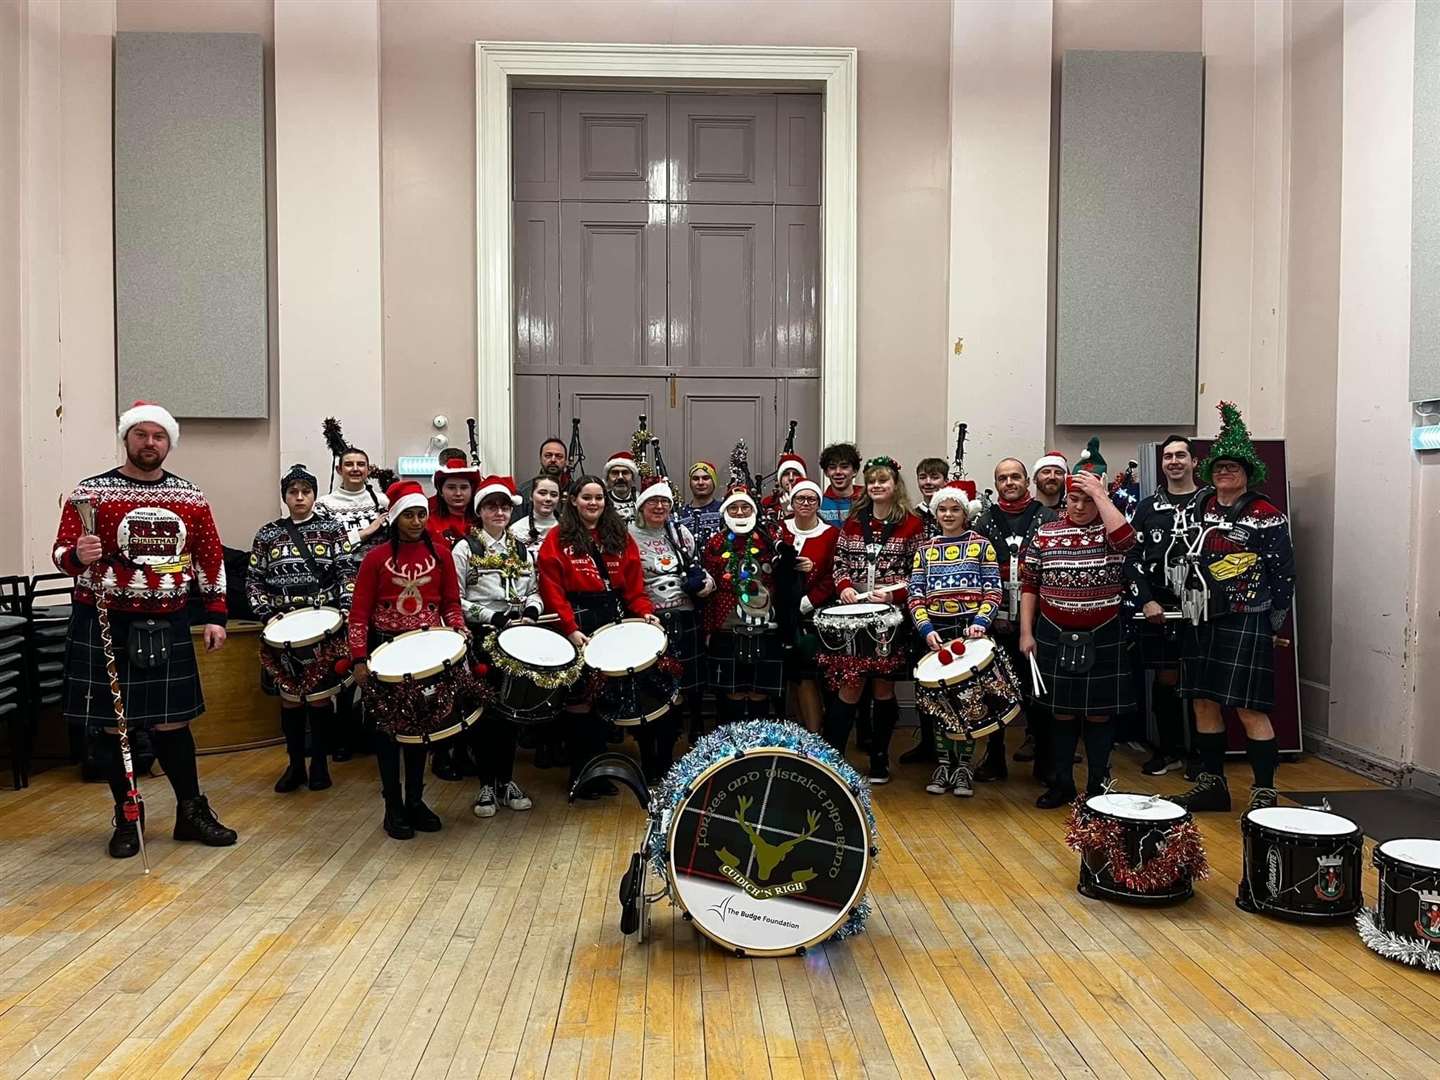 Forres and District Pipe Band members looking festive at Forres Town Hall before Christmas.